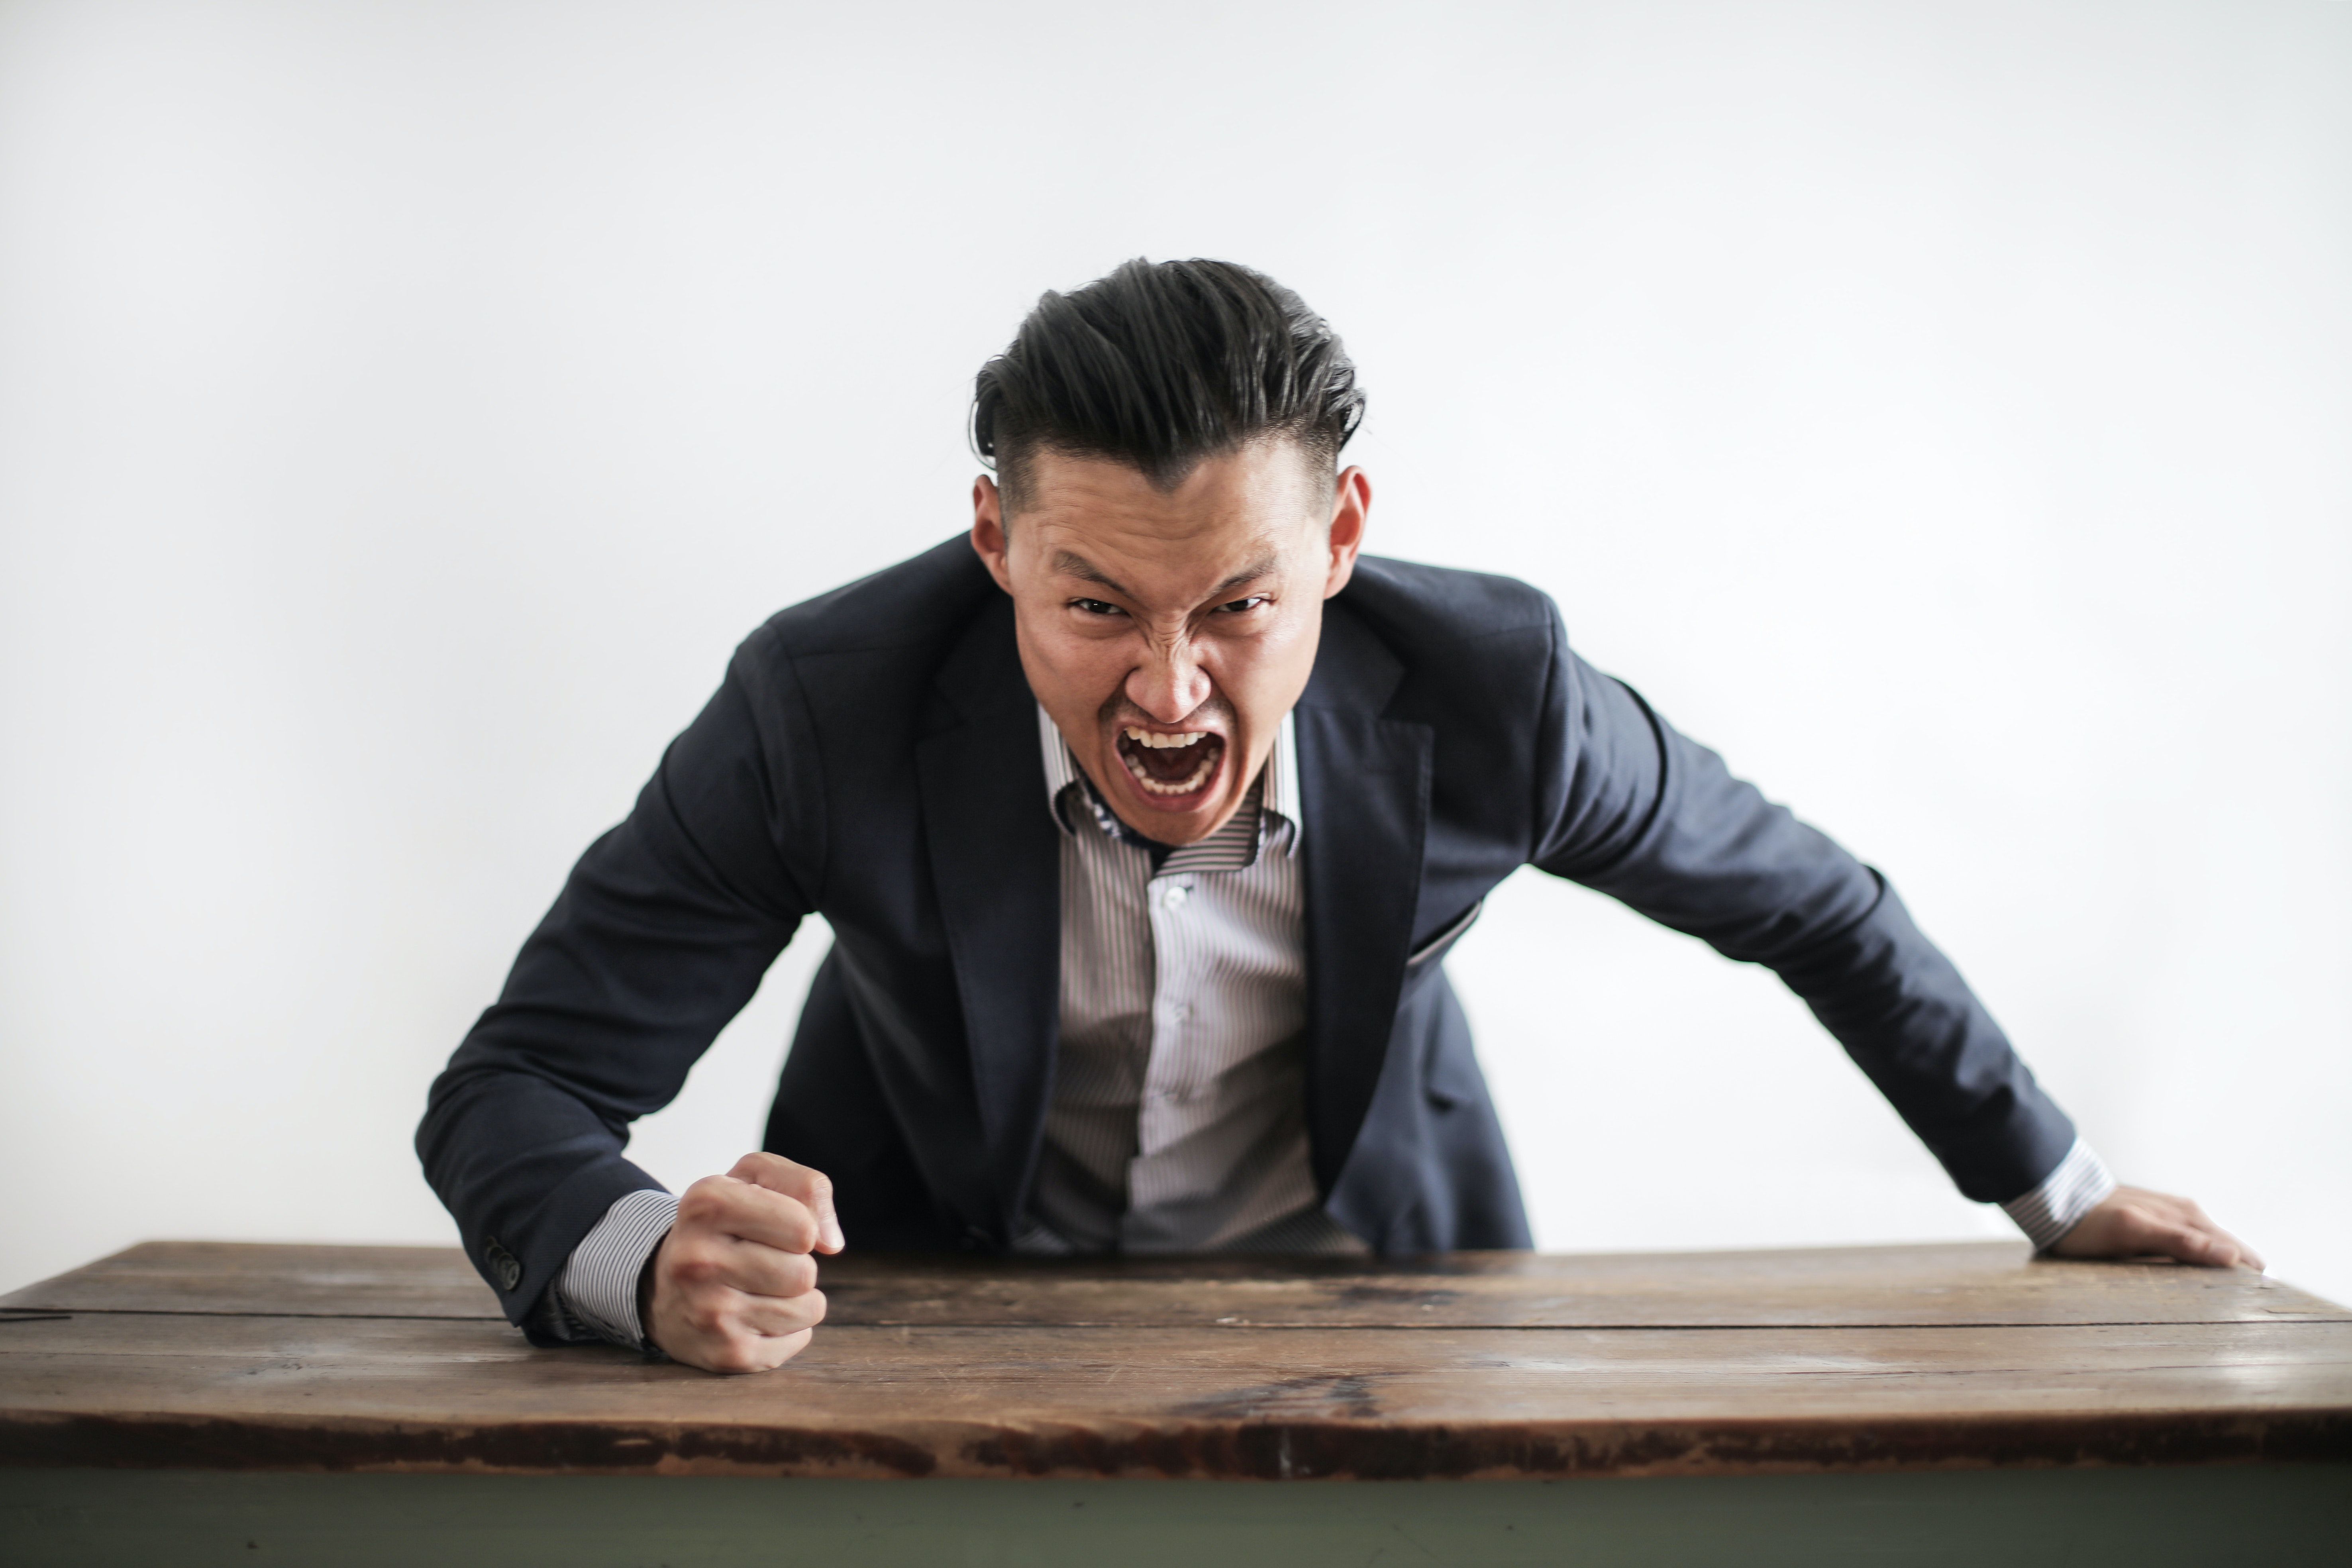 A man showing rage in office